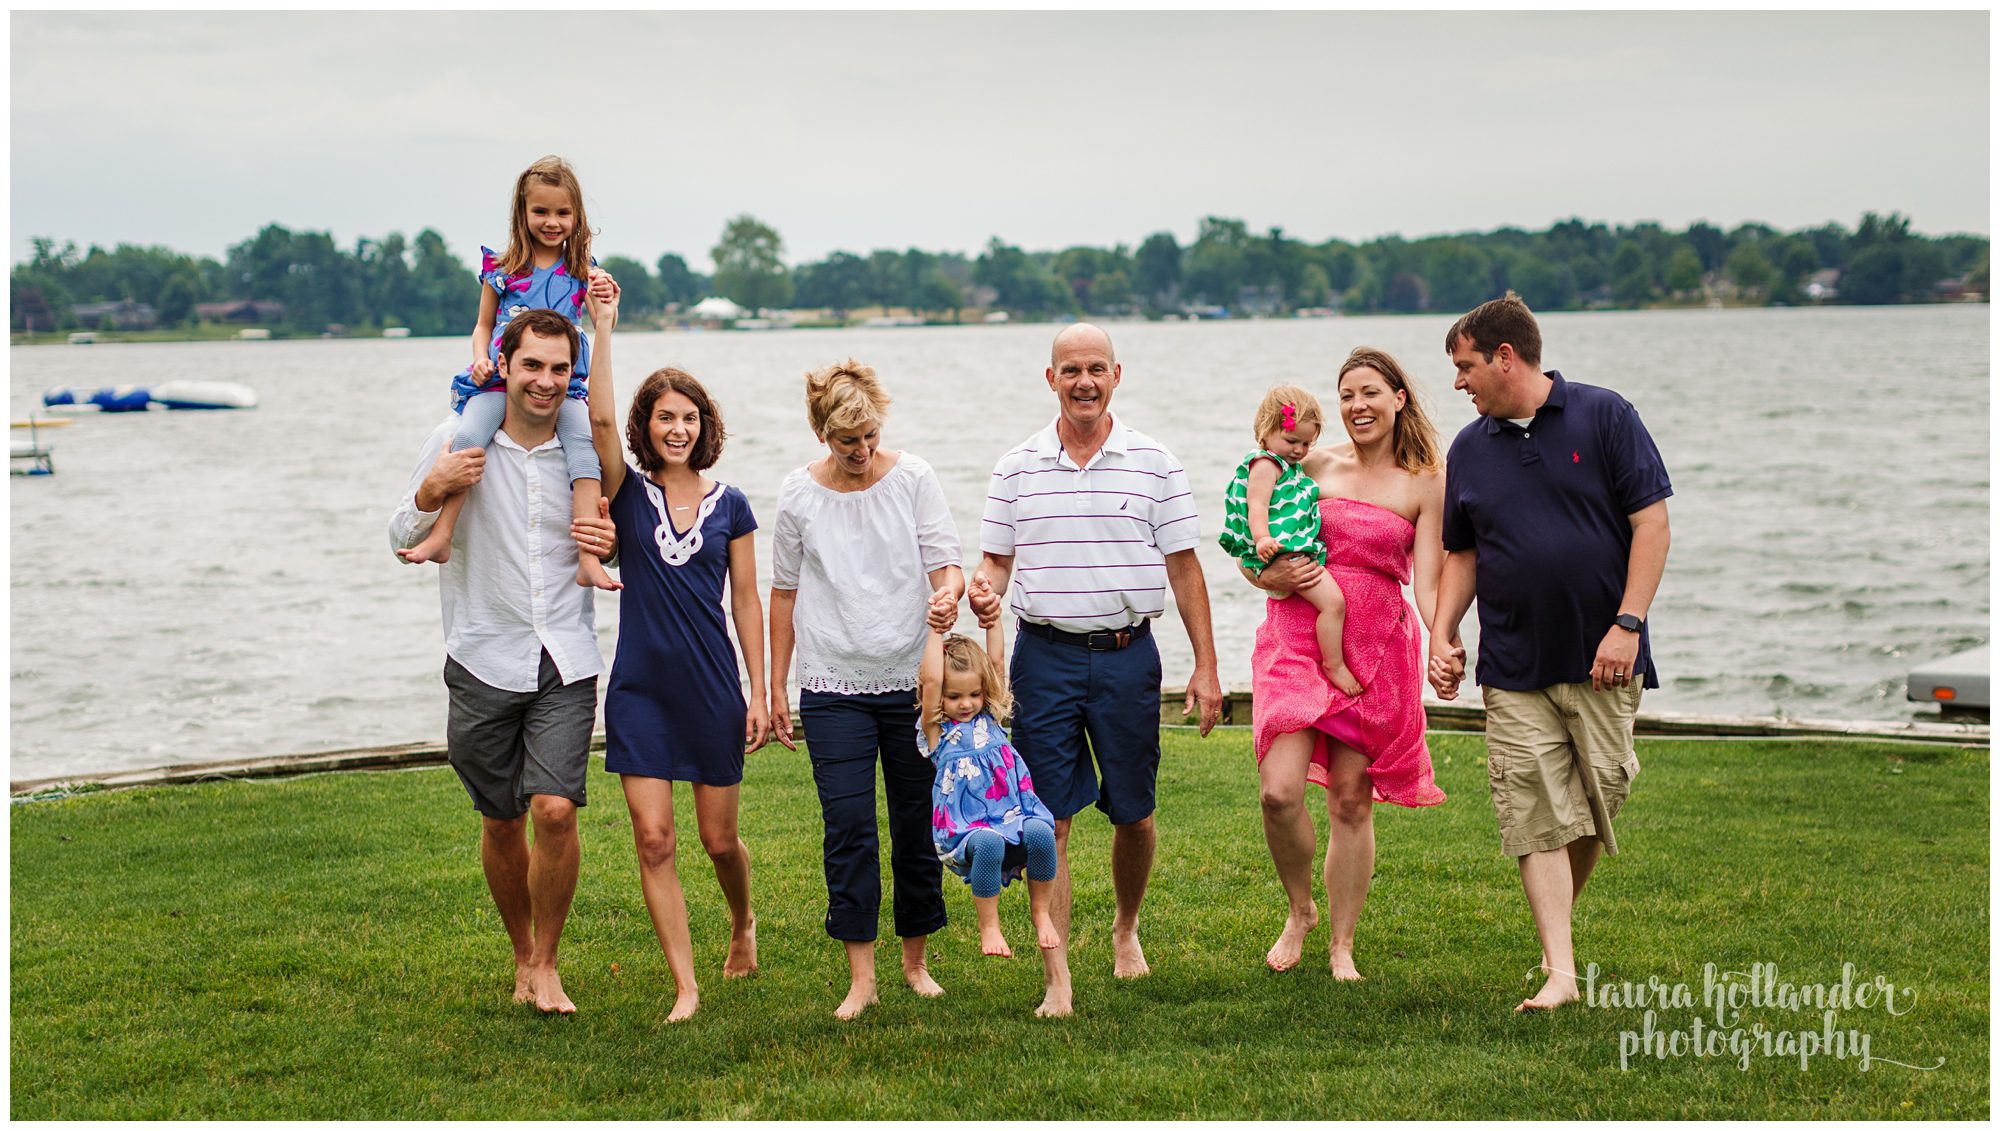 extended family portraits at the lake, backyard lake portraits, siblings and grandparents, Lifestyle family portraits, Laura Hollander Photography